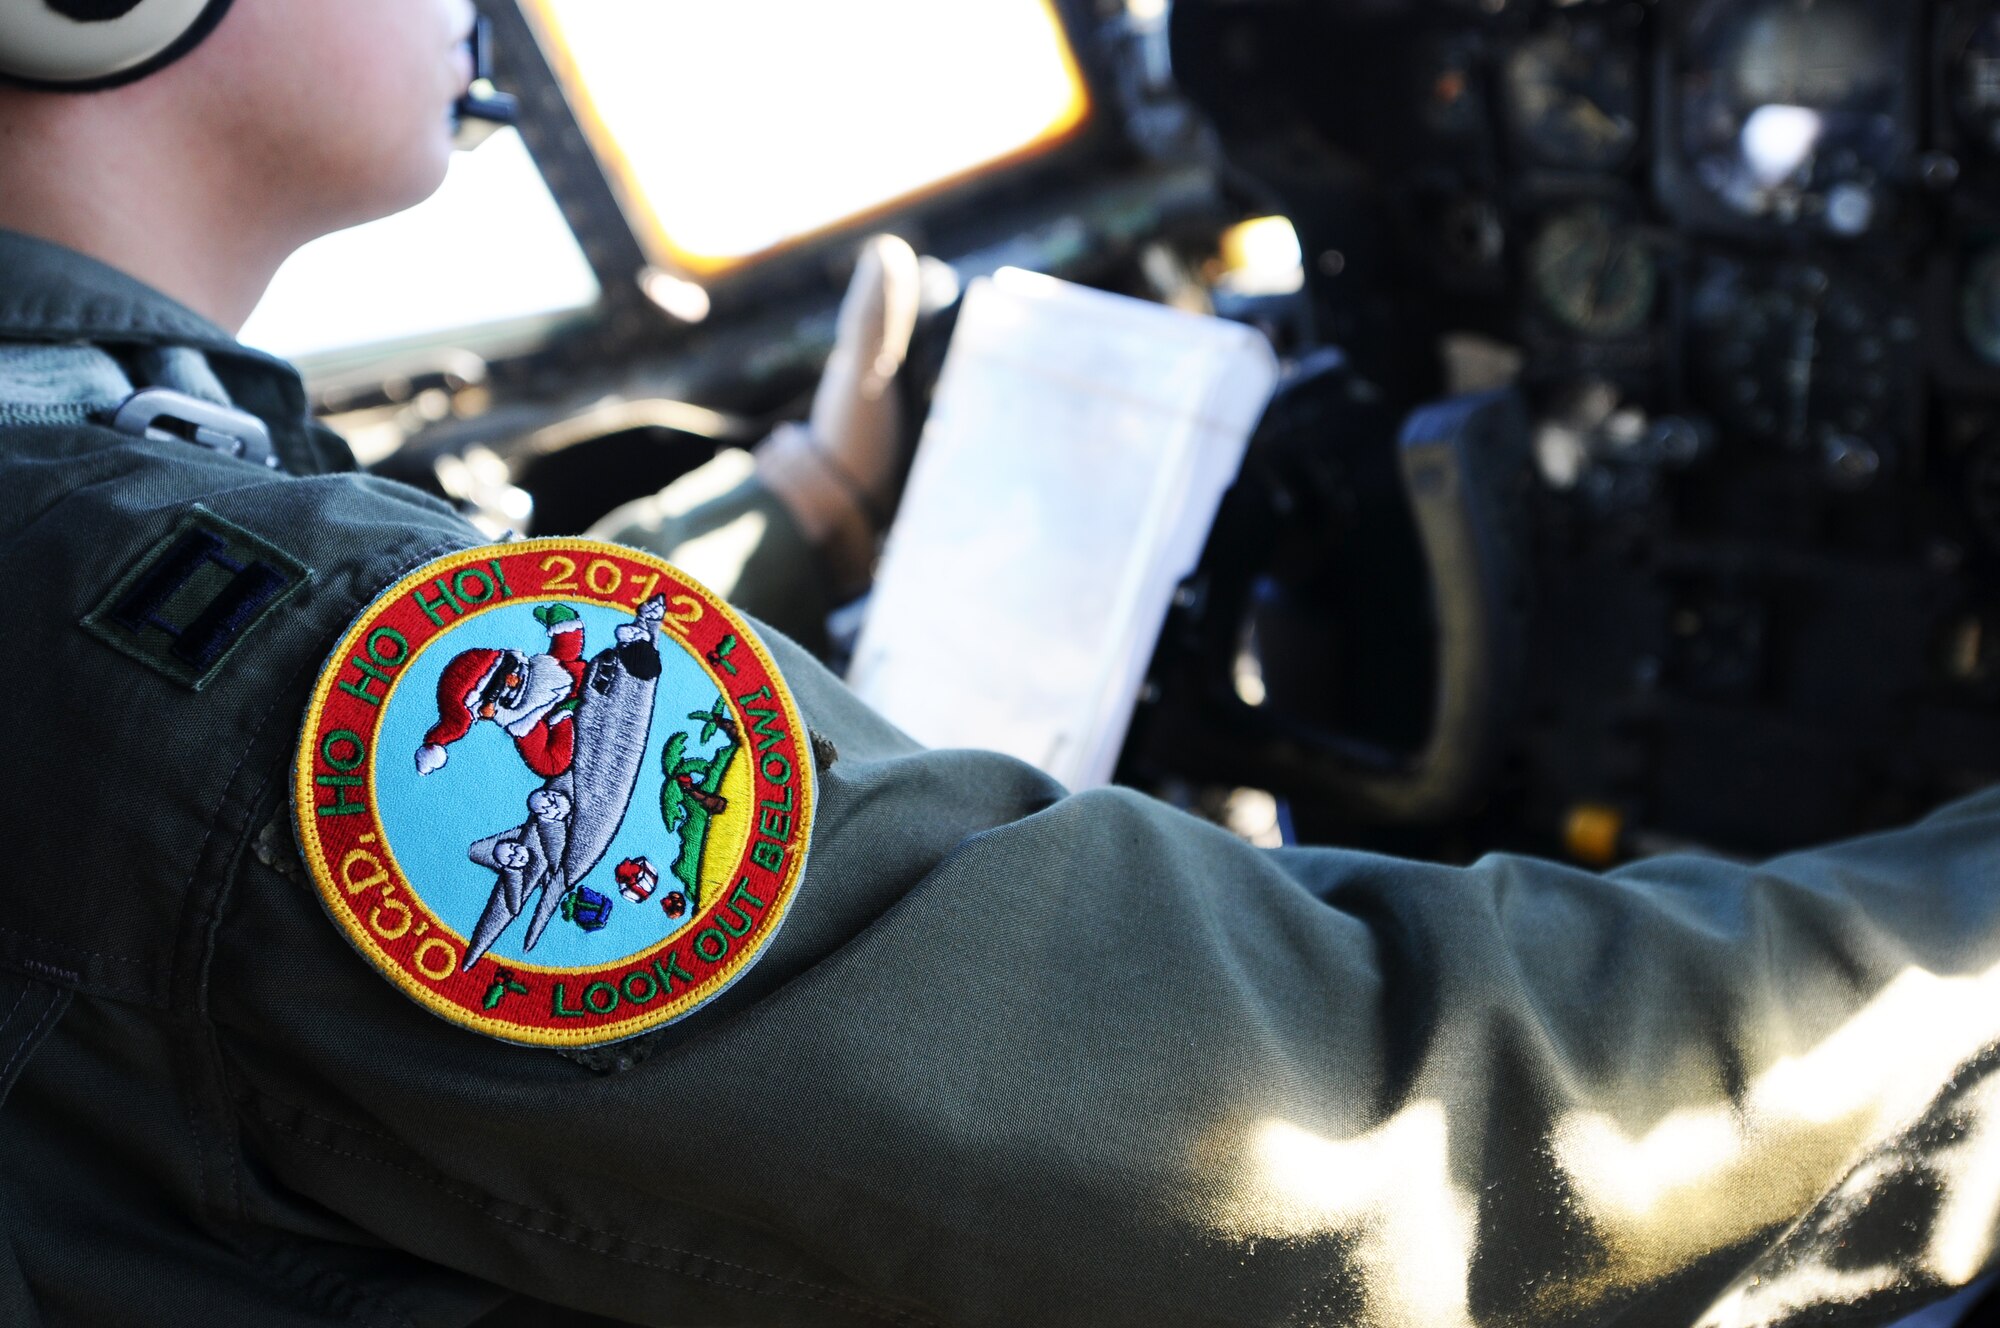 The Operation Christmas Drop 2012 patch is displayed on the arm of Capt. Anthony Felix, an instructor pilot from the 36th Airlift Squadron at Yokota Air Base, Japan, as he takes off to begin an OCD delivery flight from Andersen Air Force Base, Guam, Dec. 12, 2012.  Each year OCD provides aid to more than 30,000 islanders in Chuuk, Palau, Yap, Marshall Islands and Commonwealth of the Northern Mariana Islands. This year is the 61st anniversary of OCD, making it the longest running humanitarian mission in the world. In total, there are eight planned days of air drops, with 54 islands scheduled to receive humanitarian aid.  (U.S. Air Force photo by Senior Airman Carlin Leslie/Released)